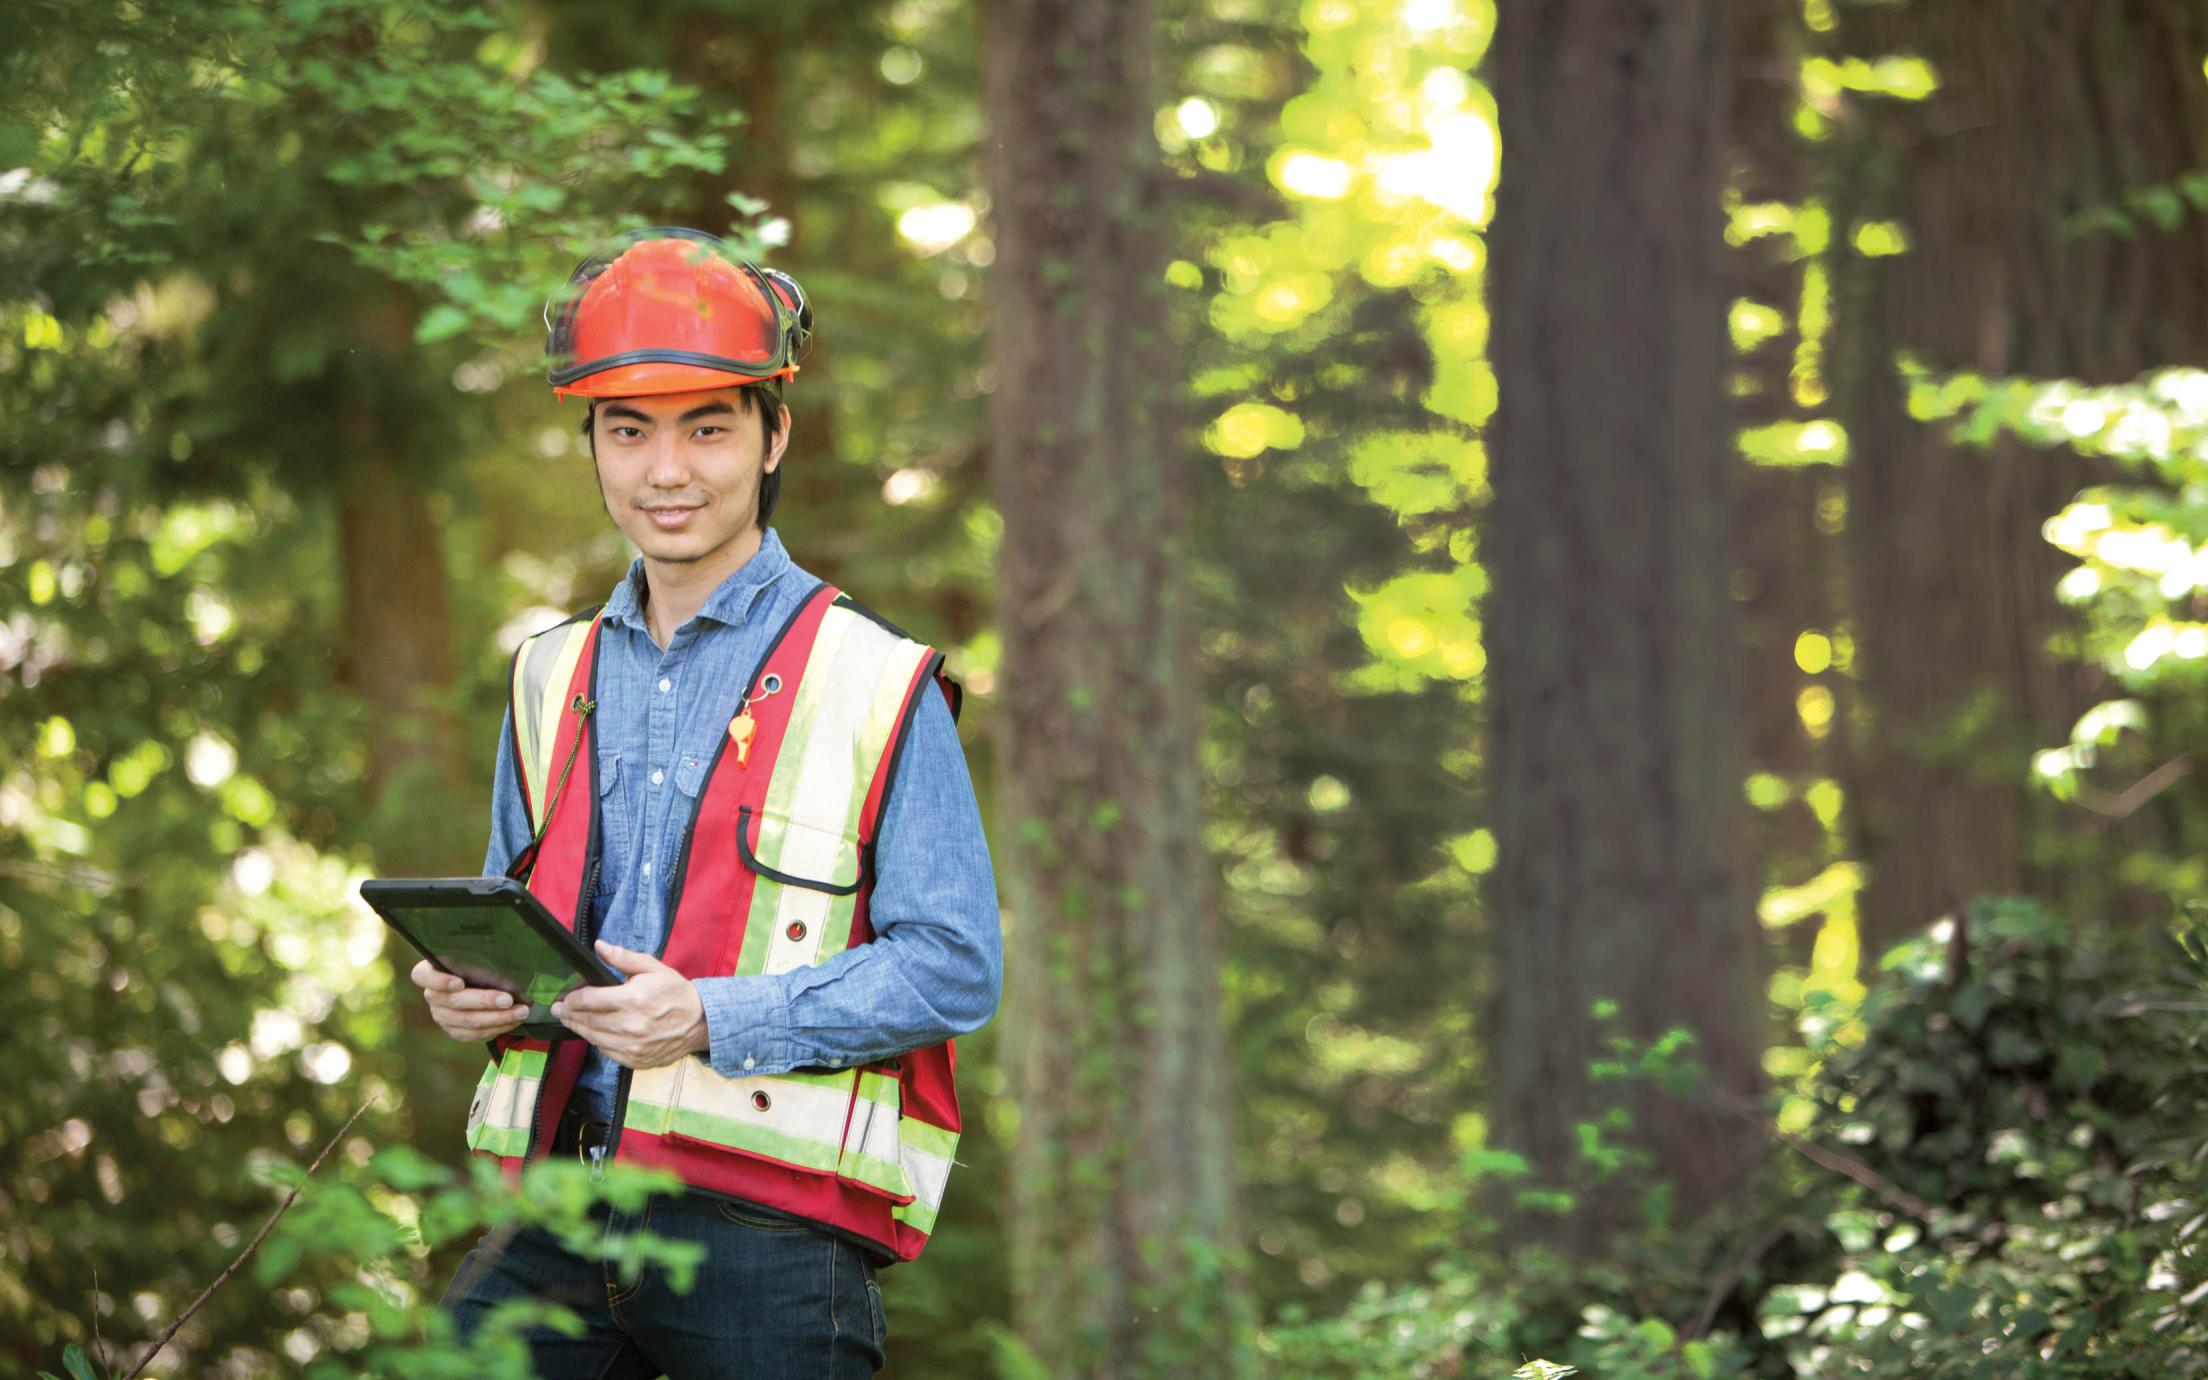 A former Student of Vancouver Island University's Forest Resources Technology program found work as a forestry engineer